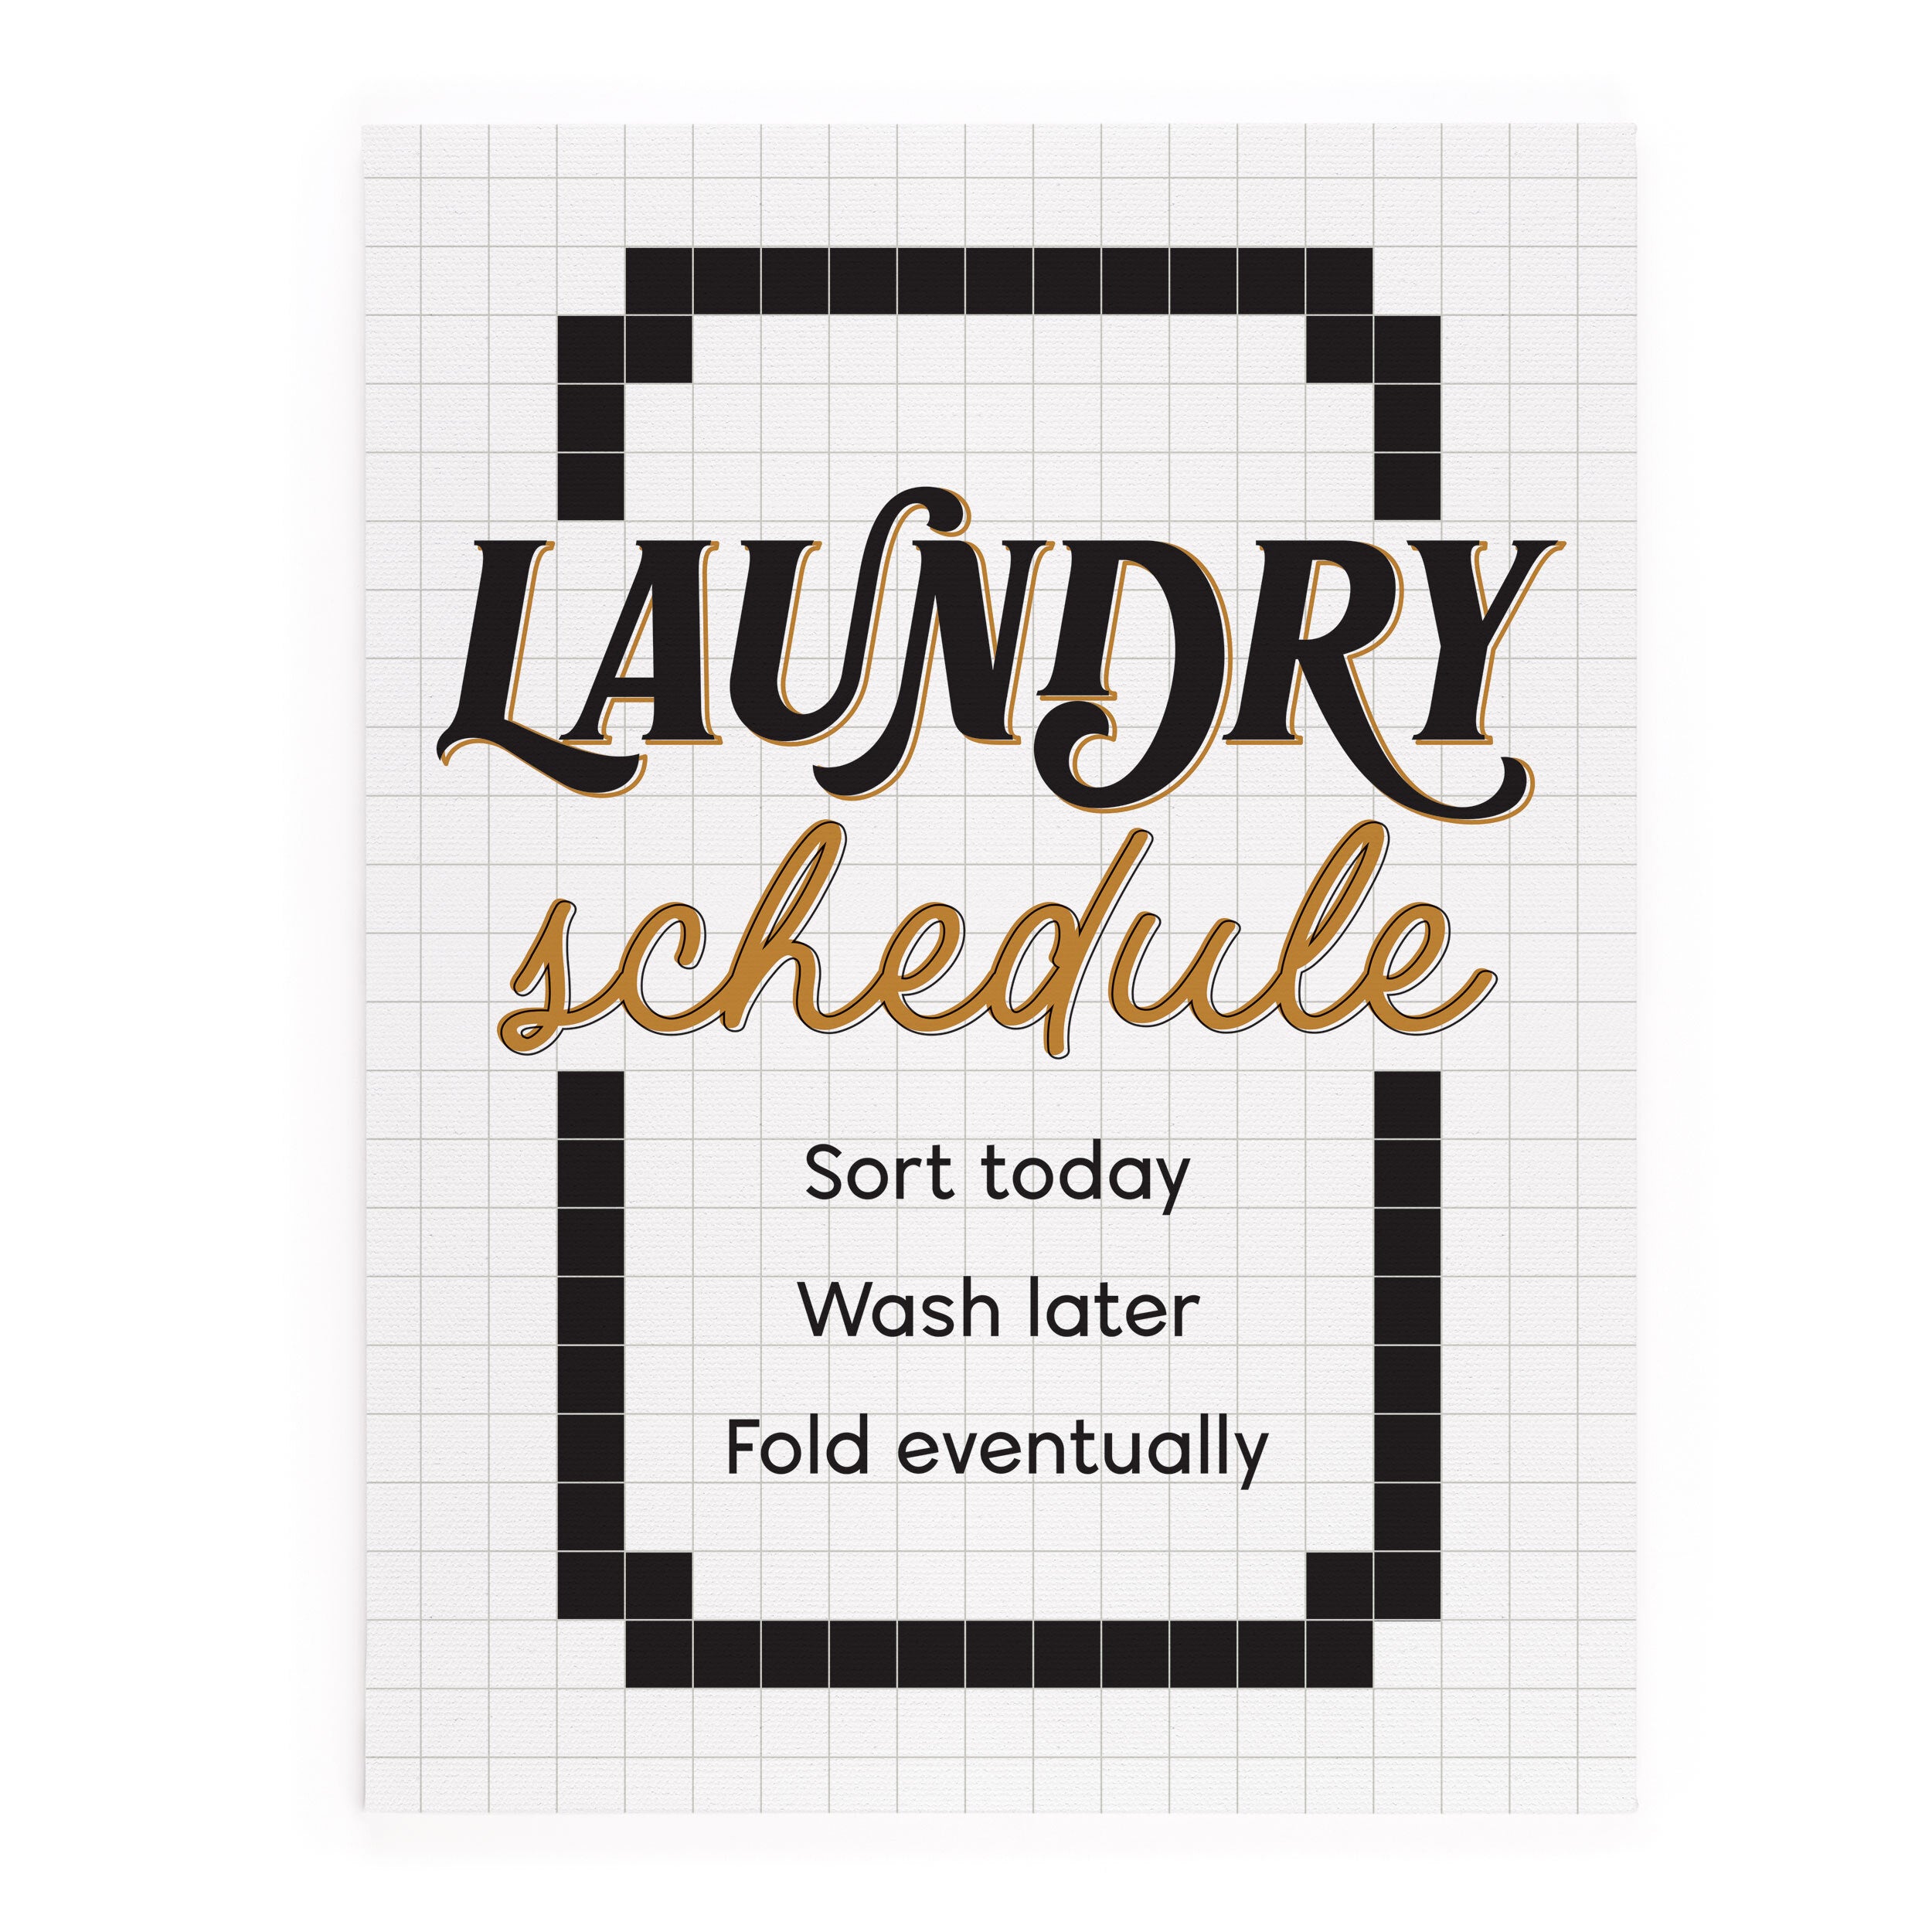 **Laundry Schedule. Sort Today, Wash Later, Fold Eventually Canvas Décor